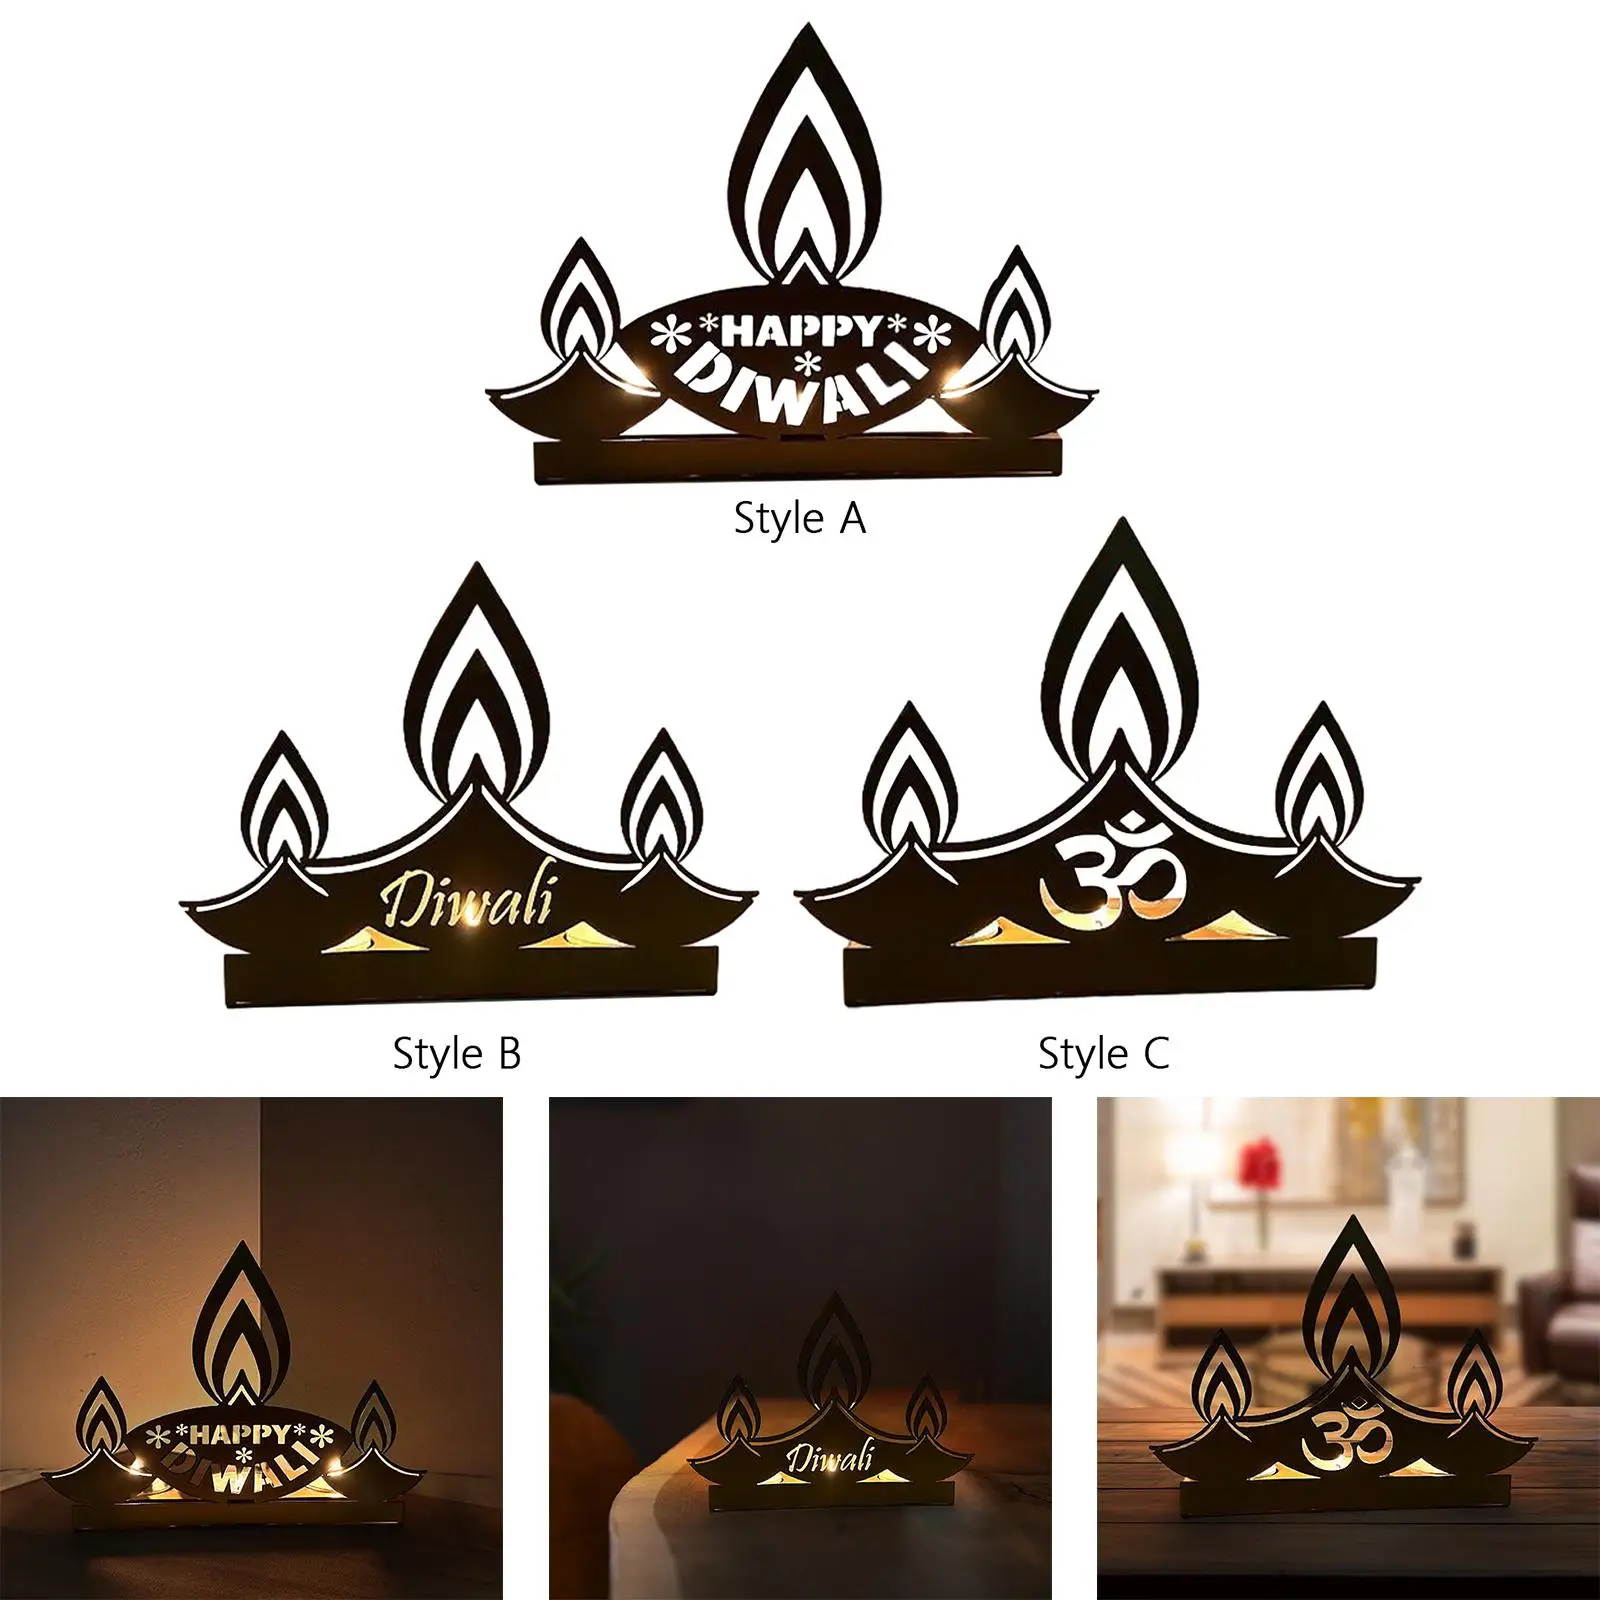 Diwali Candle Holder Iron Indian Tealight Candlestick Housewarming Gift Decorative Candleholder for Table Centerpieces Festival